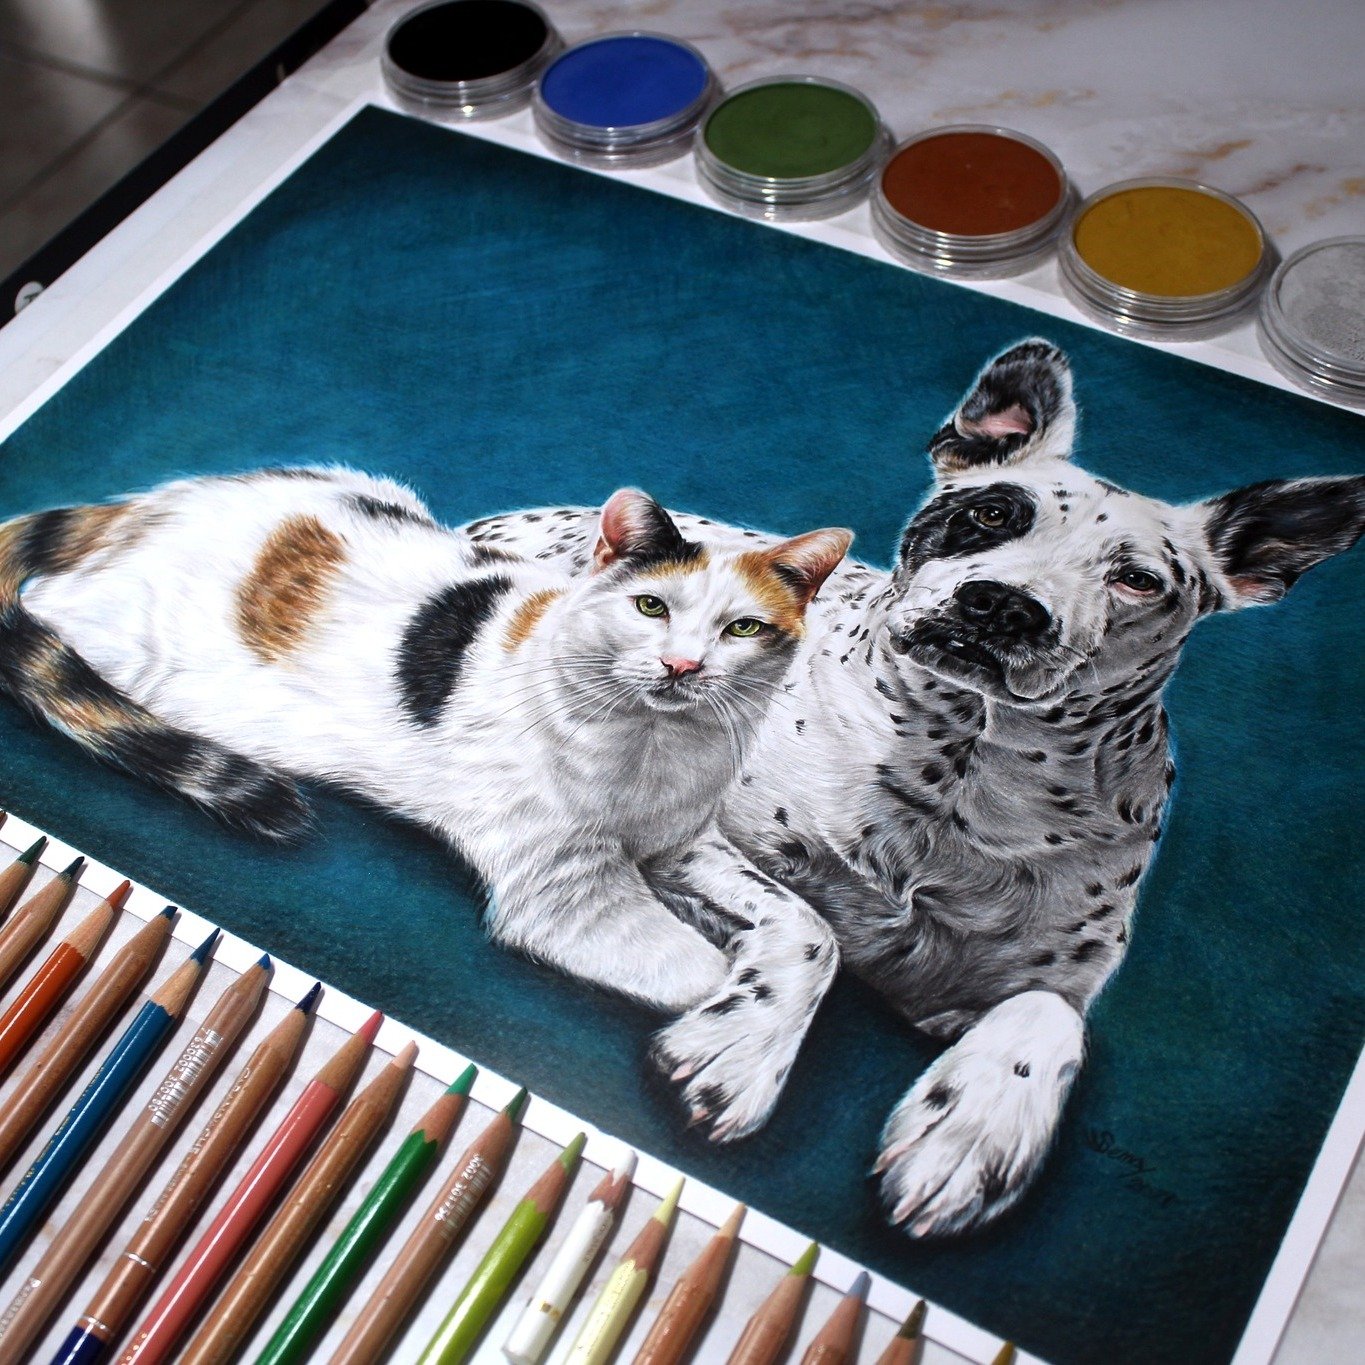 What are the differences between owning a cat and owning a dog? 
My portrait of Lily and Pongo.